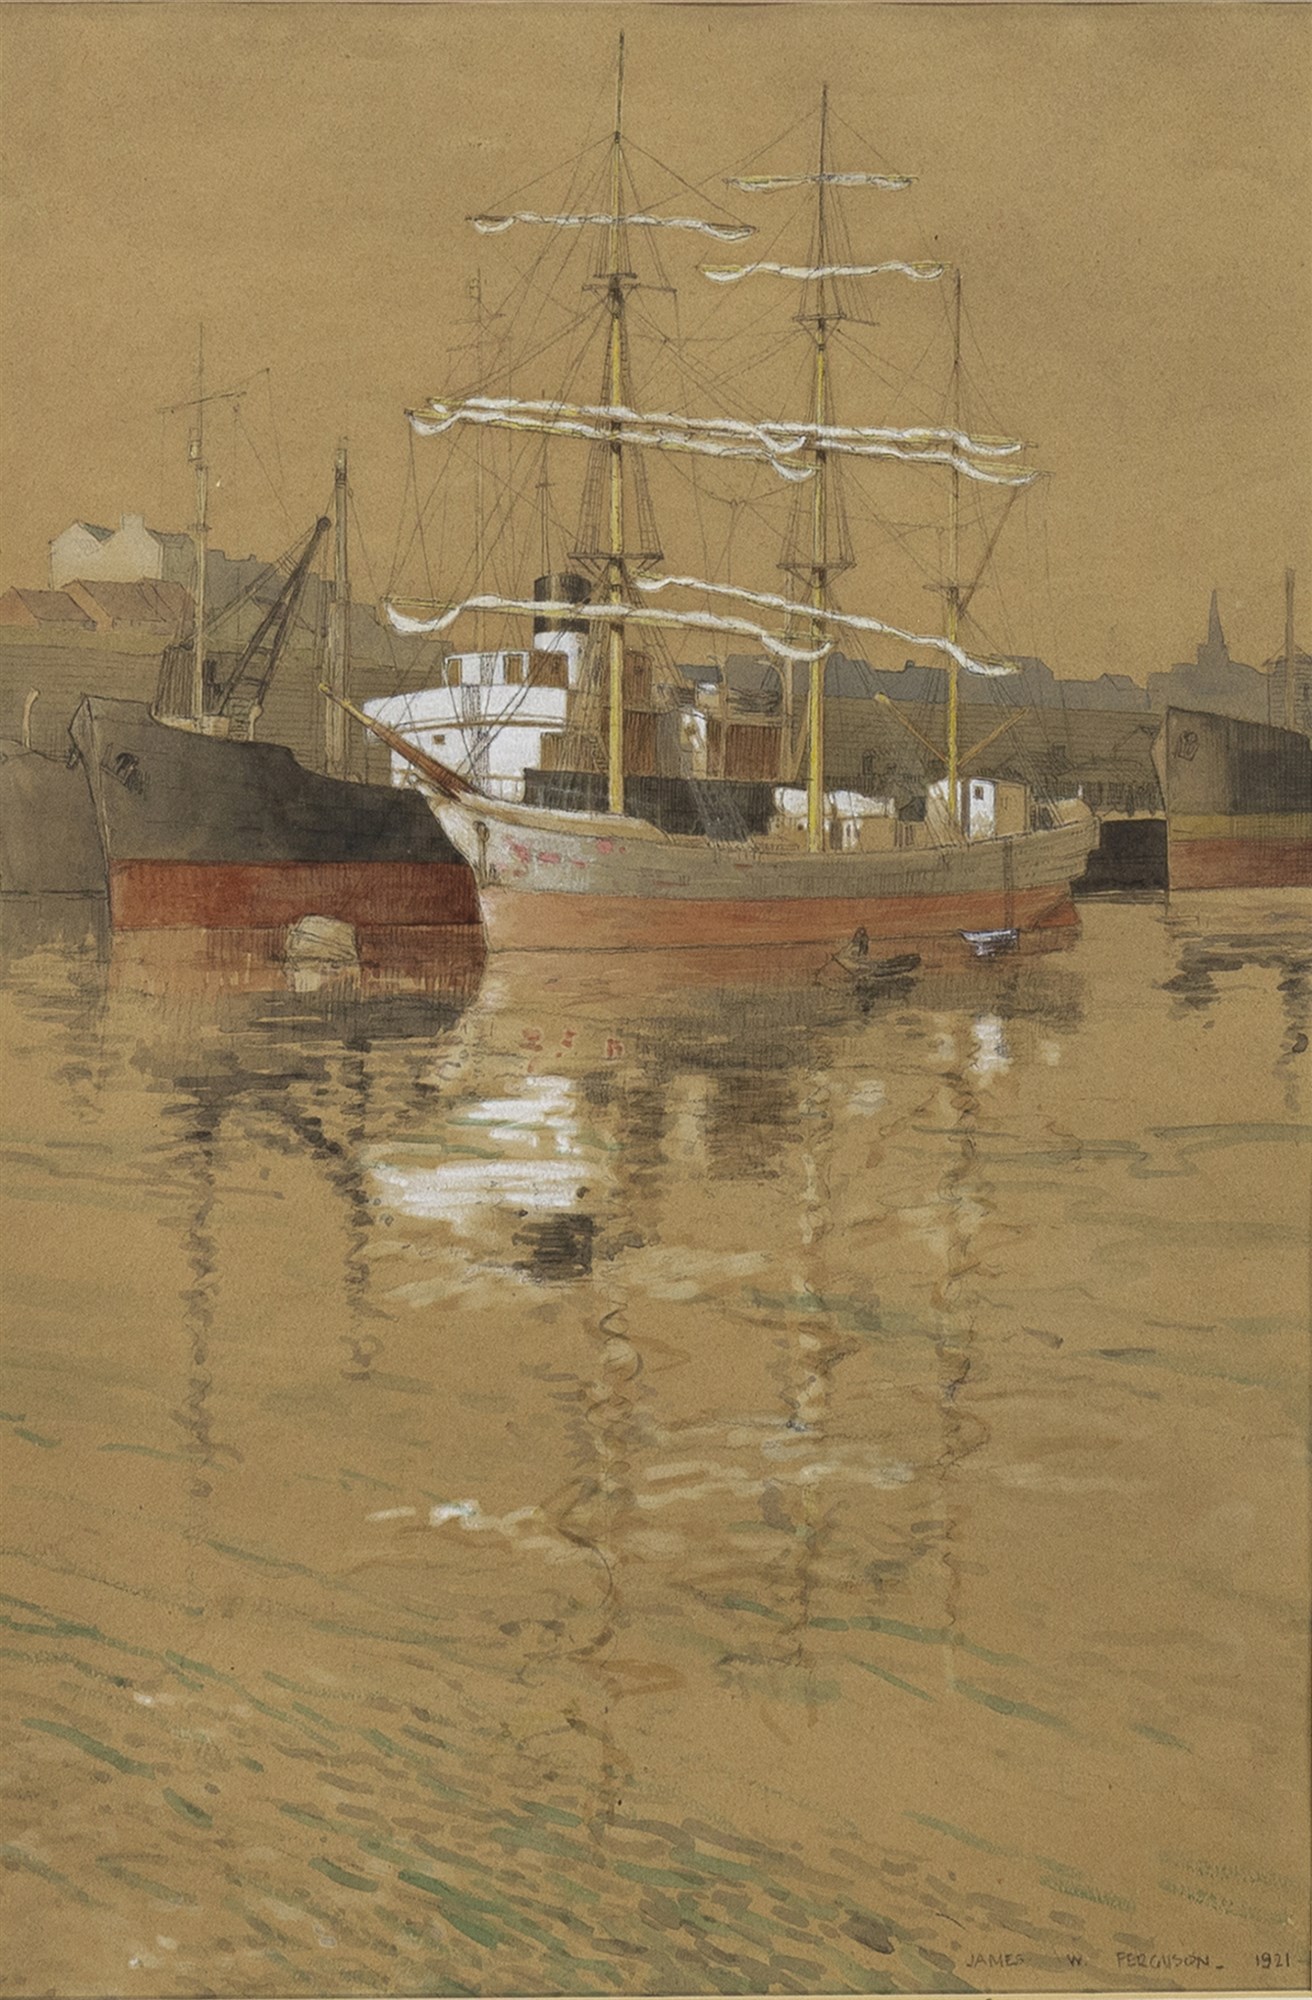 SHIPPING ON THE CLYDE, A WATERCOLOUR BY JAMES W FERGUSON